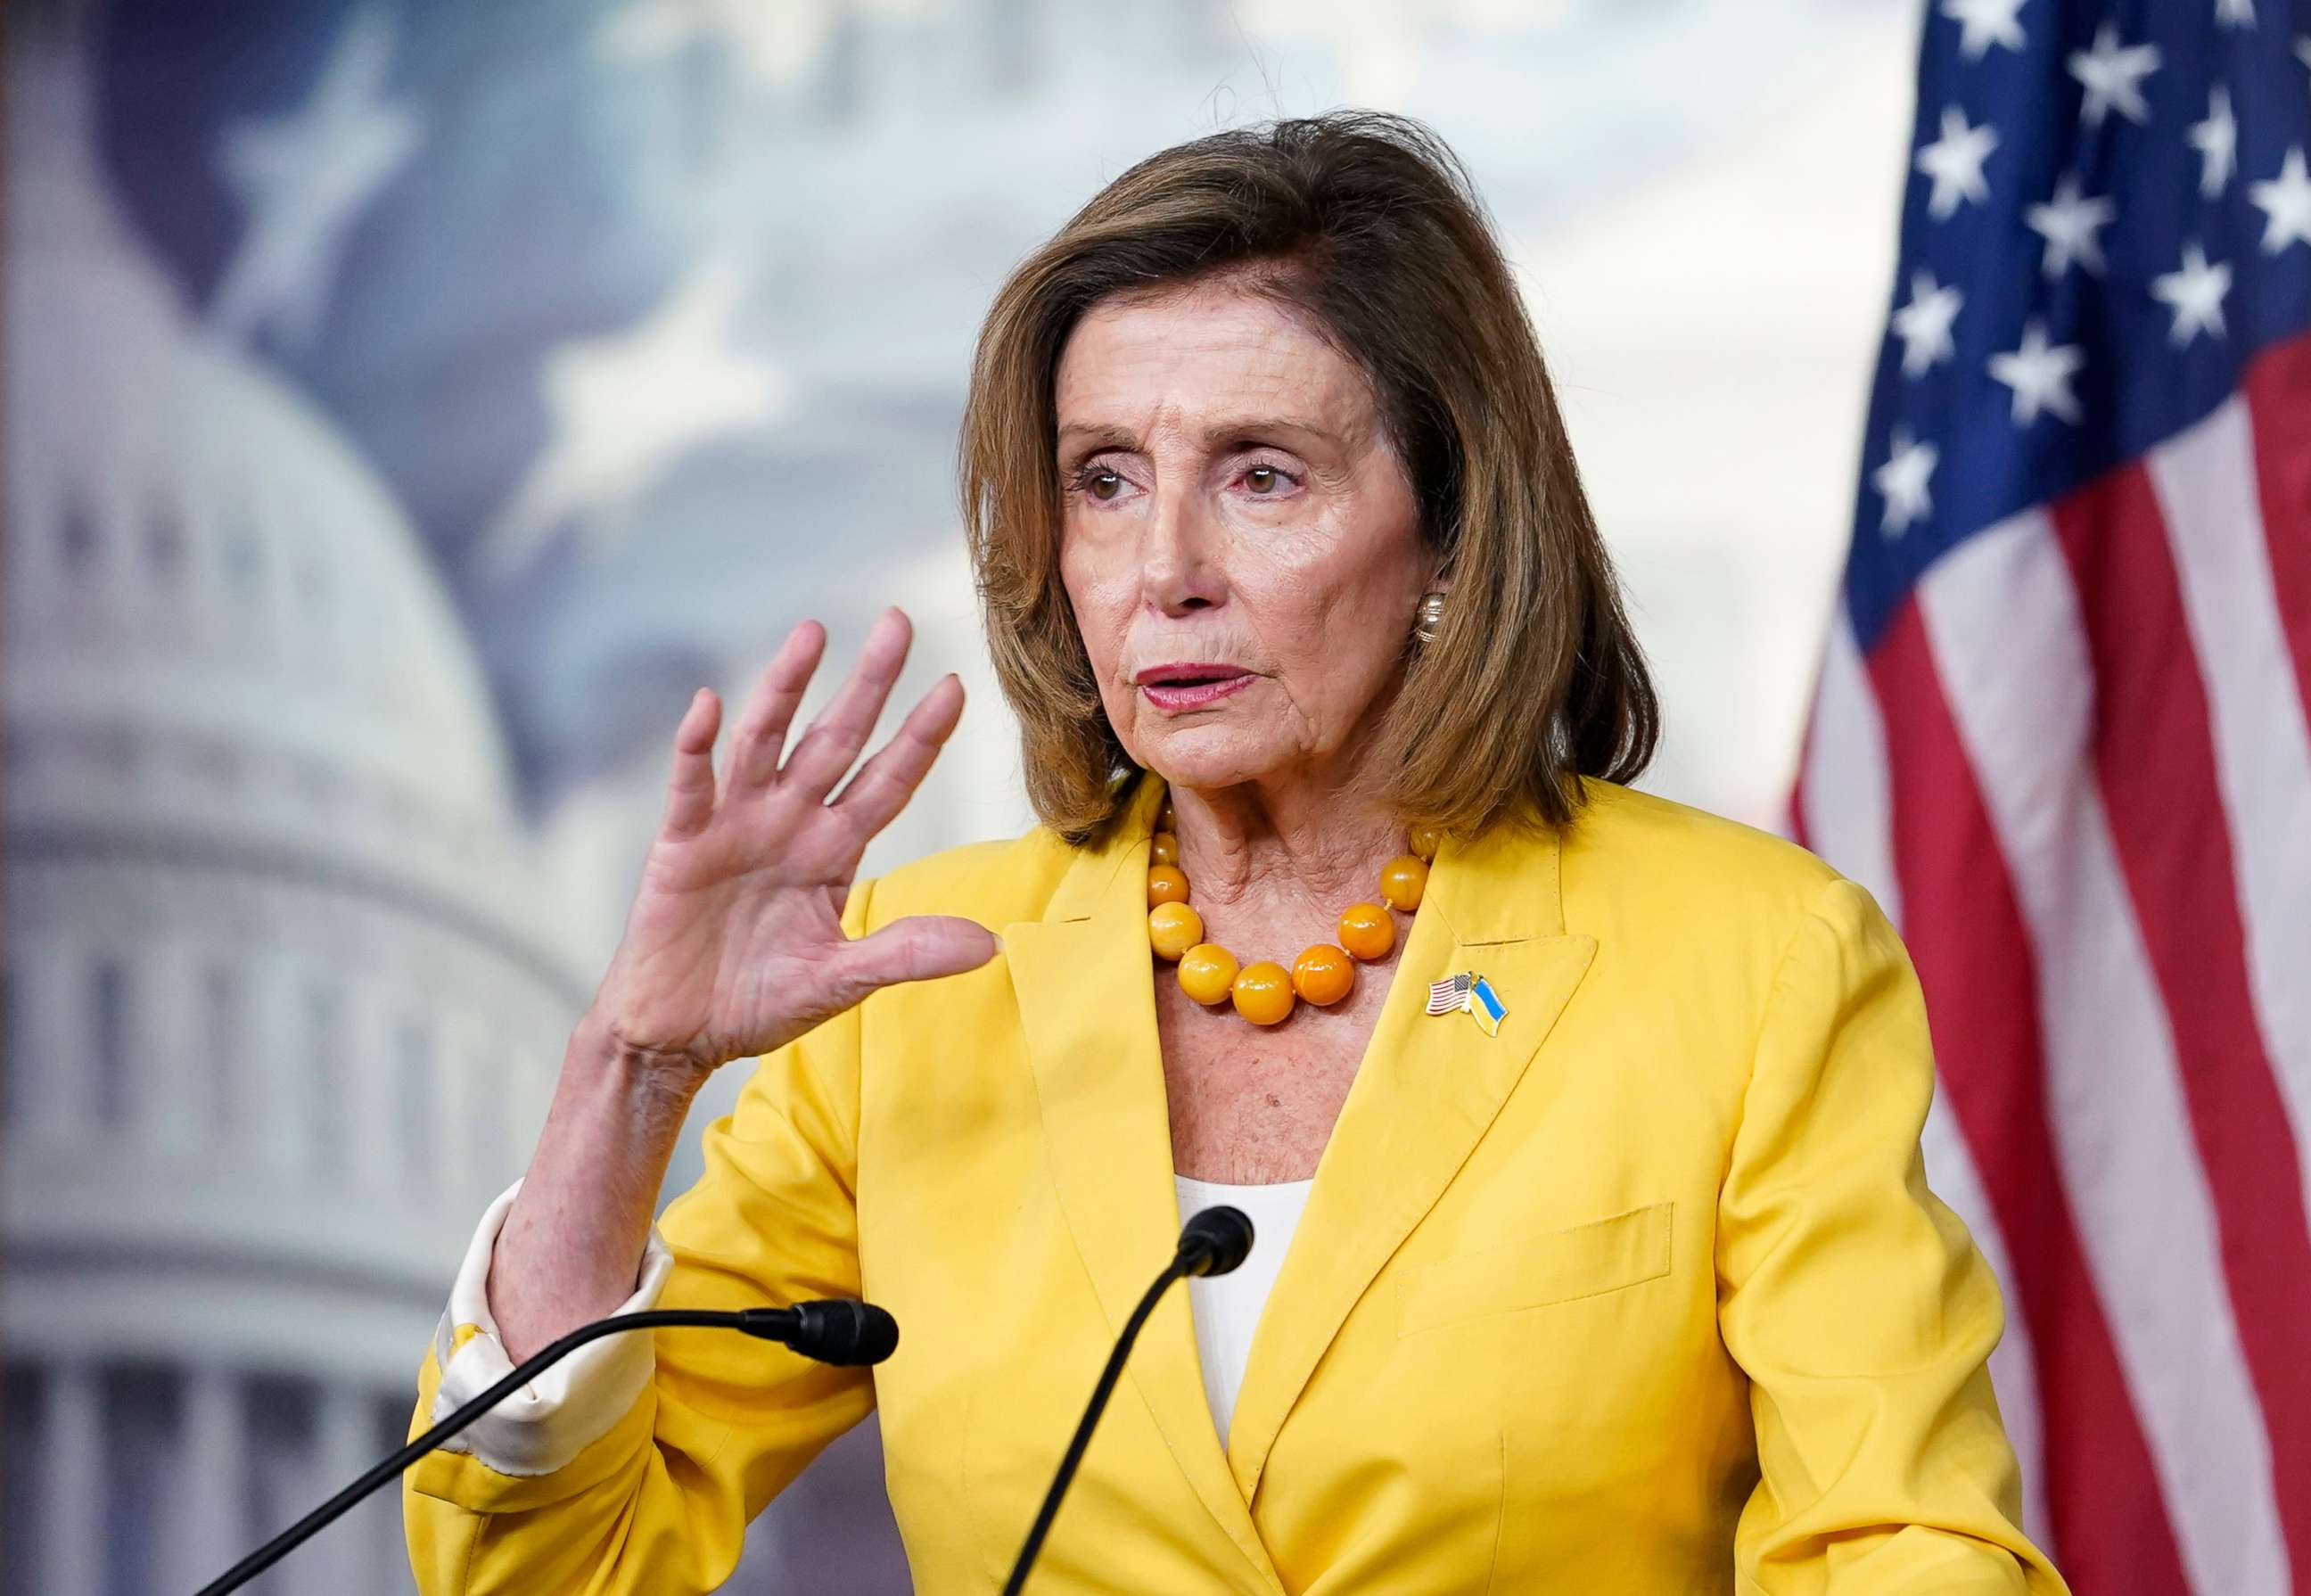 PHOTO: House Speaker Nancy Pelosi speaks at her weekly press conference on Capitol Hill, Aug. 12, 2022, in Washington, D.C.